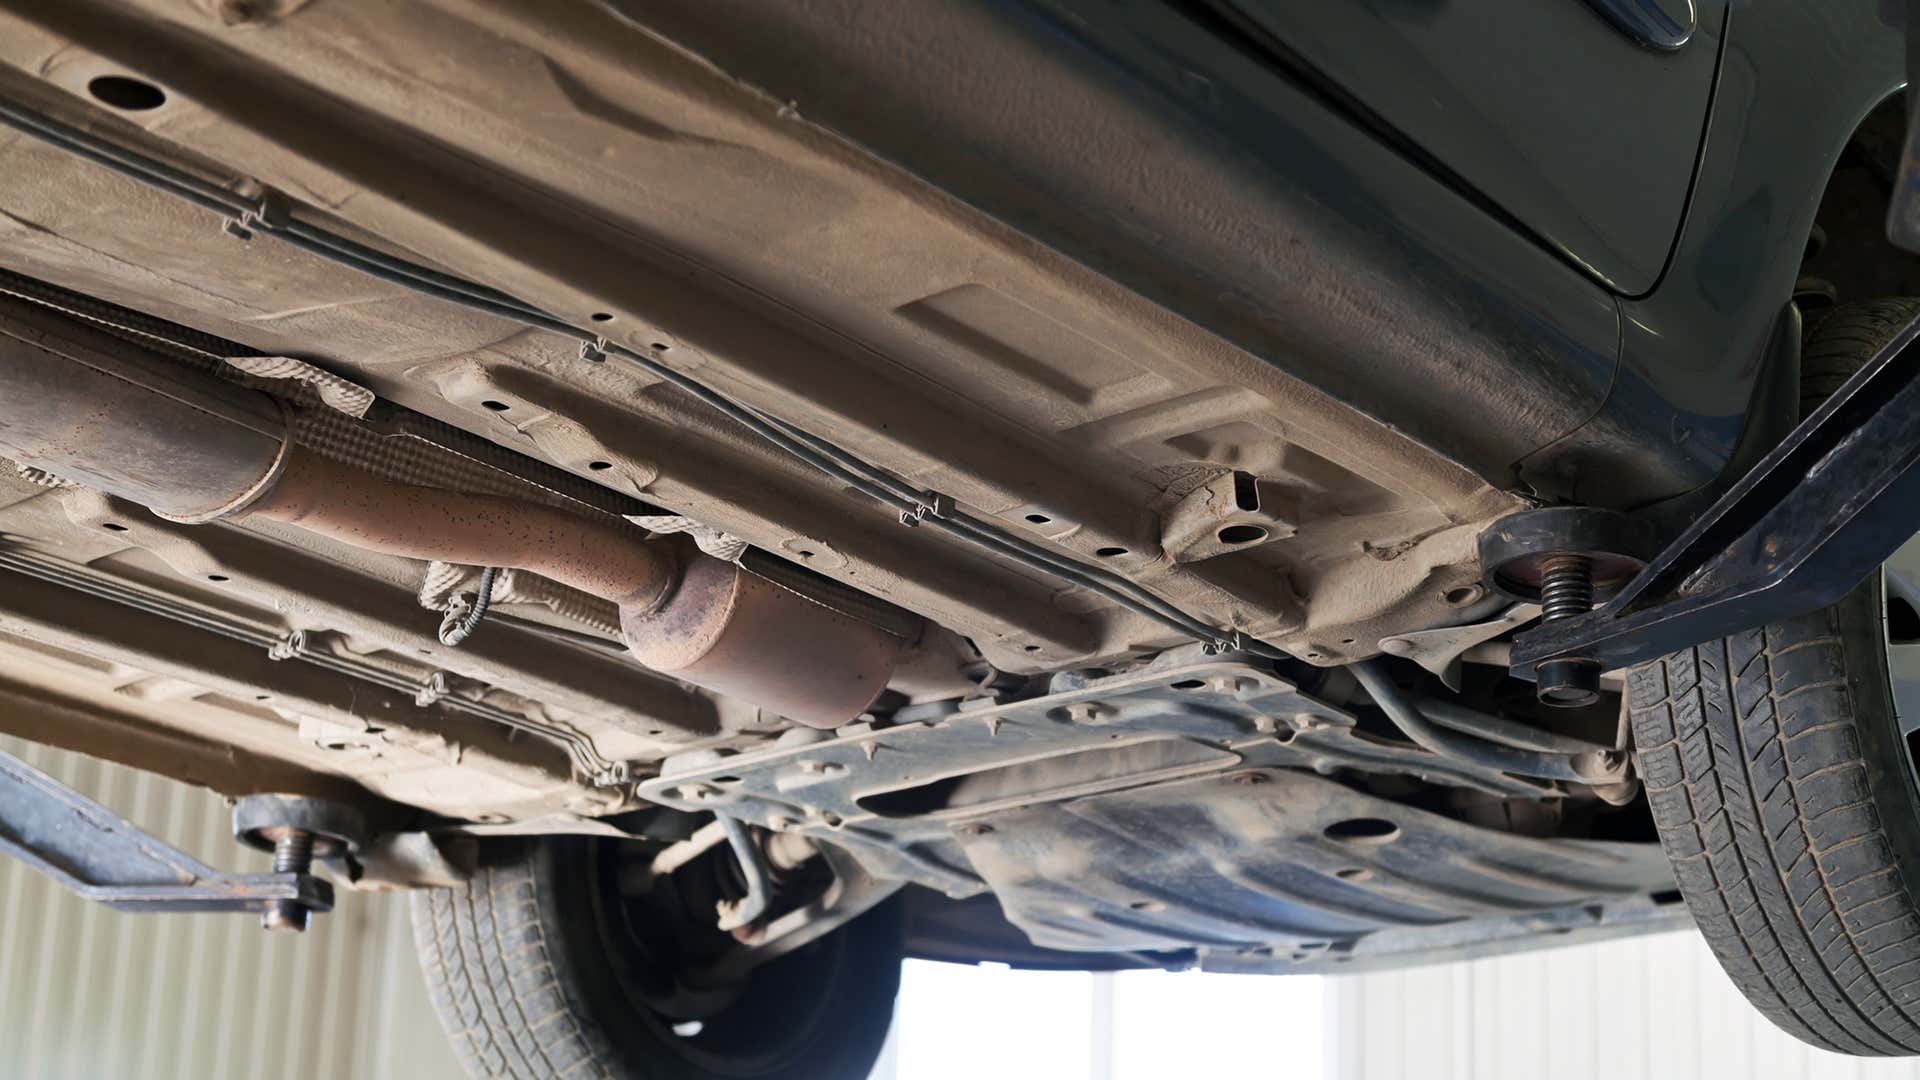 The exhaust system is tightly tucked underneath a car.